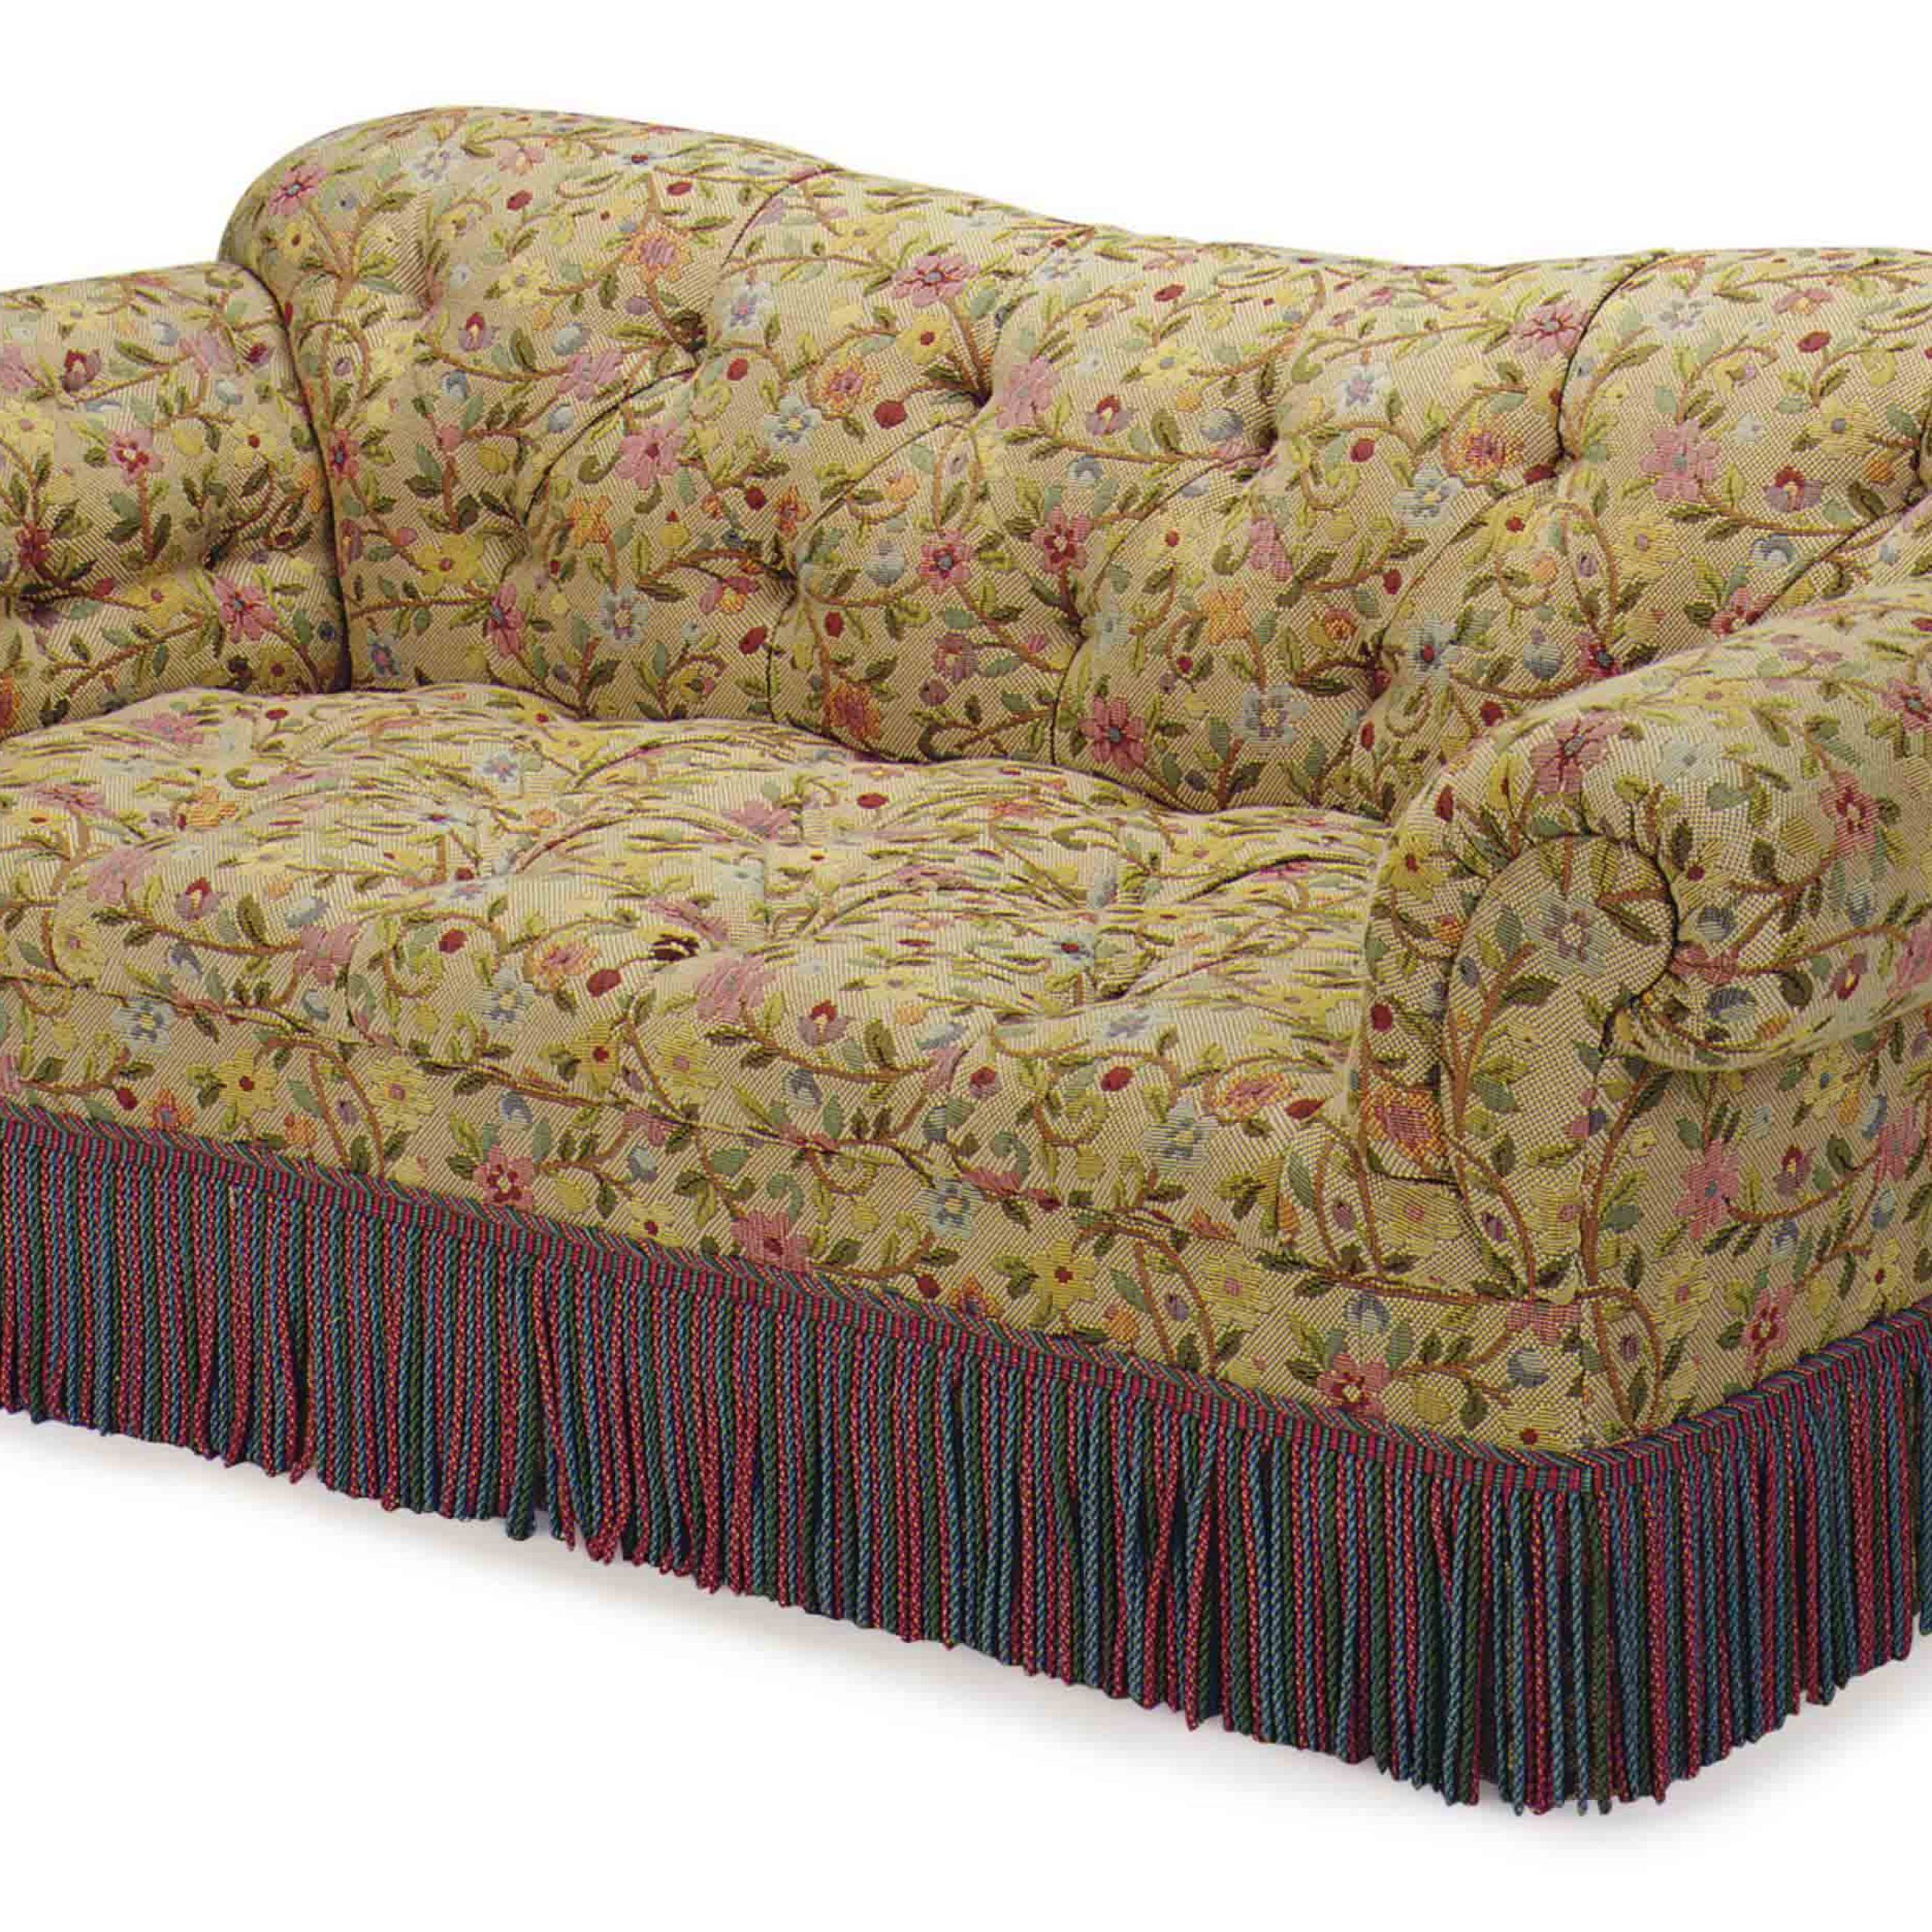 A Button Tufted Floral Pattern Upholstered Sofa, , Late 20th Century Inside Sofas In Pattern (Gallery 11 of 20)